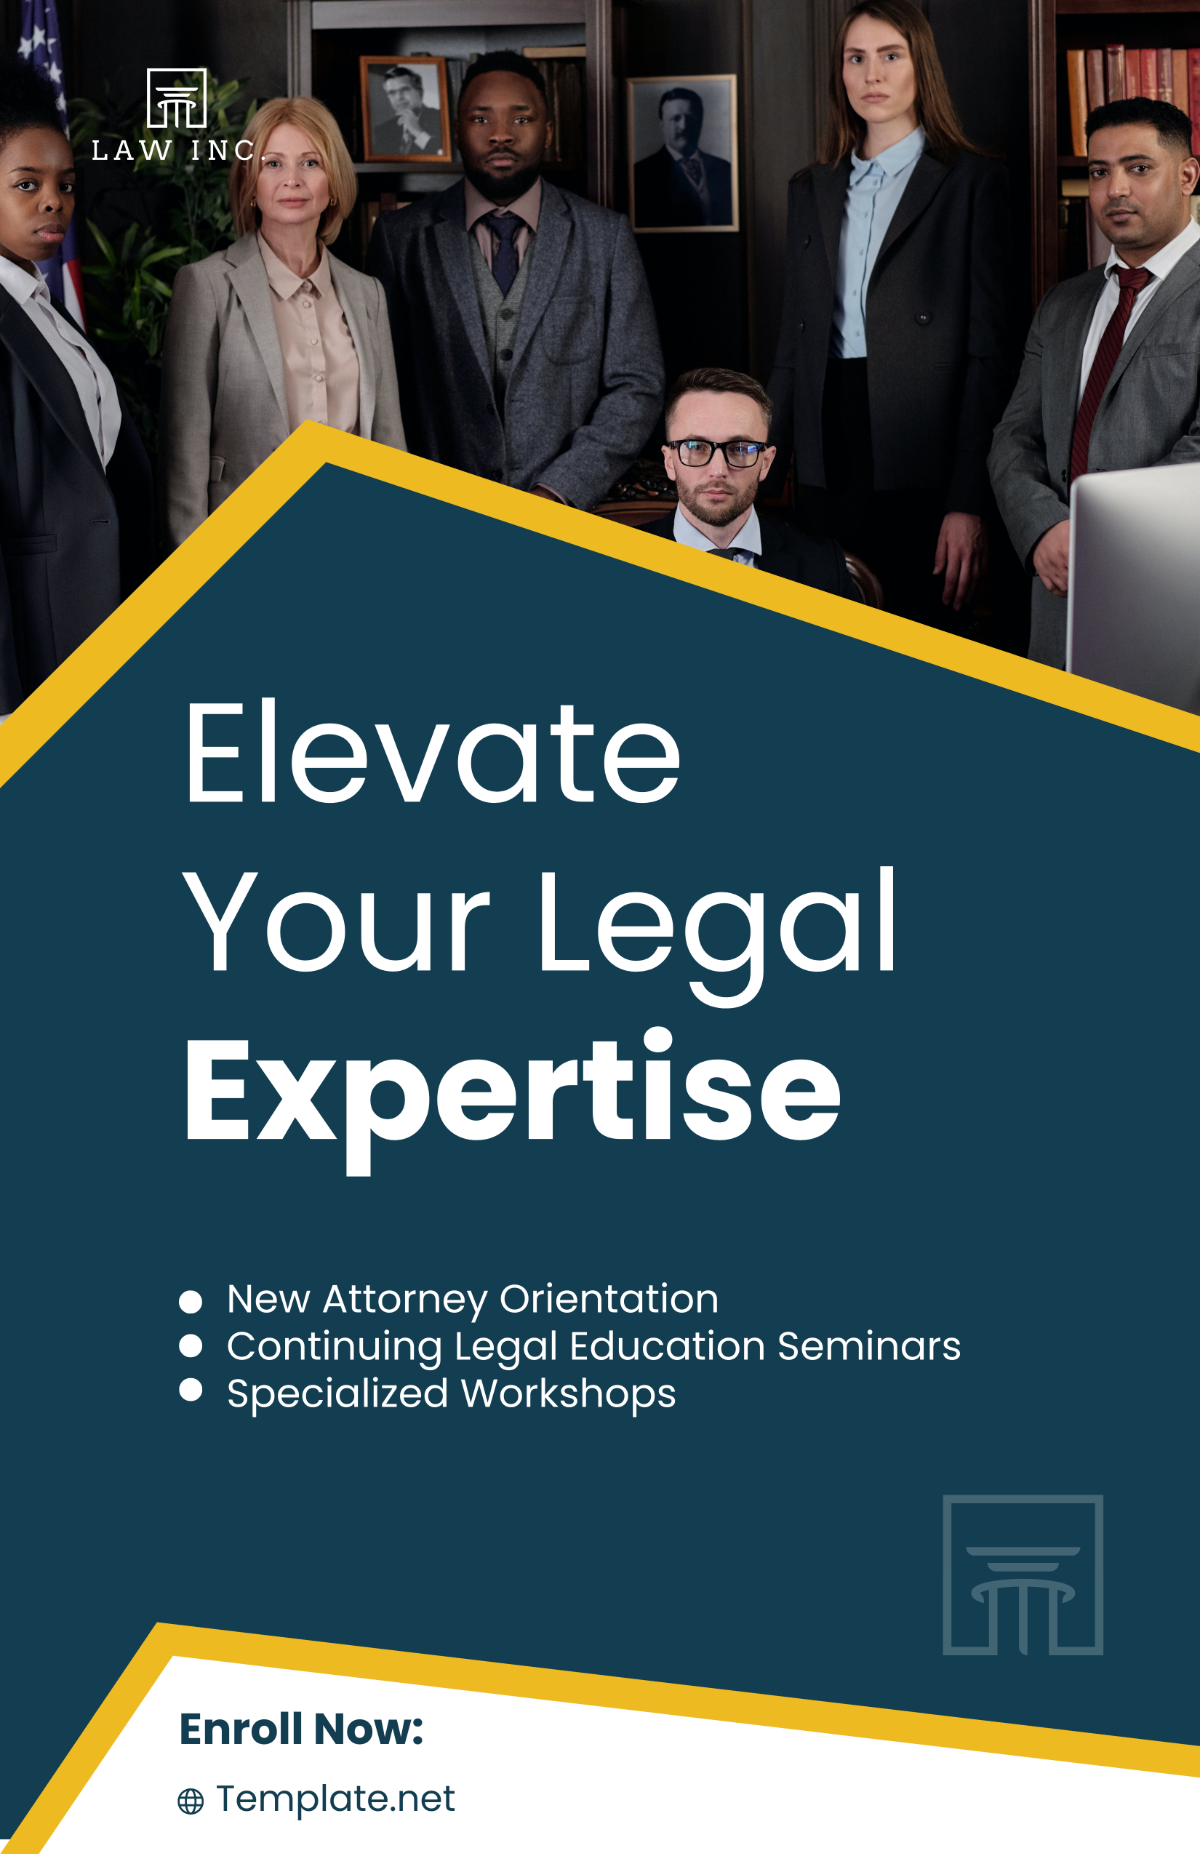 Law Firm Training Poster Template